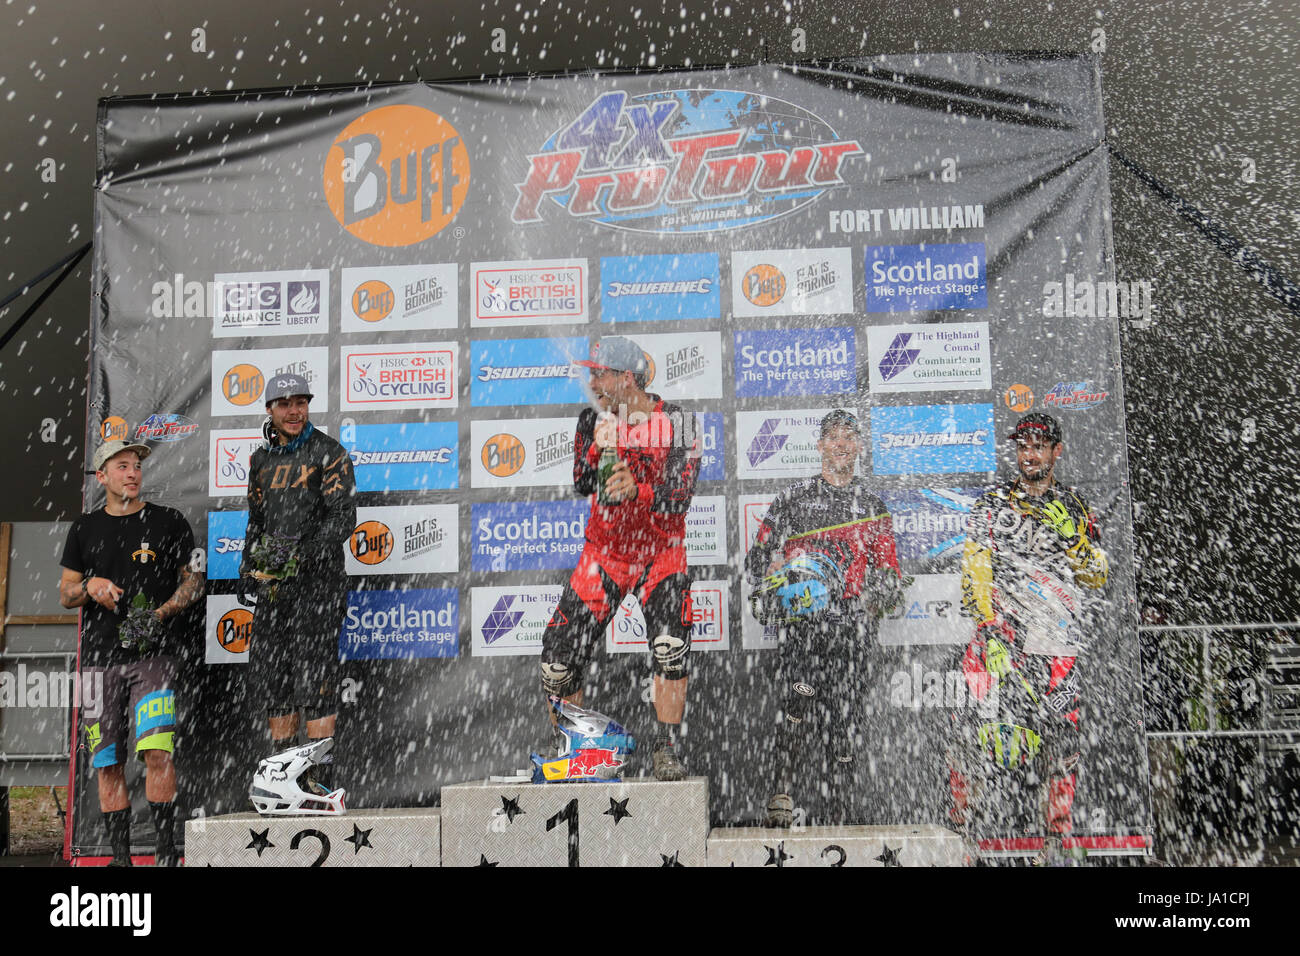 Fort William, Scotland. 3rd June, 2017. Thomas Slavik winner of the 4X finals at Fort William spraying champagne on the podium. © Malcolm Gallon/Alamy Live News Stock Photo